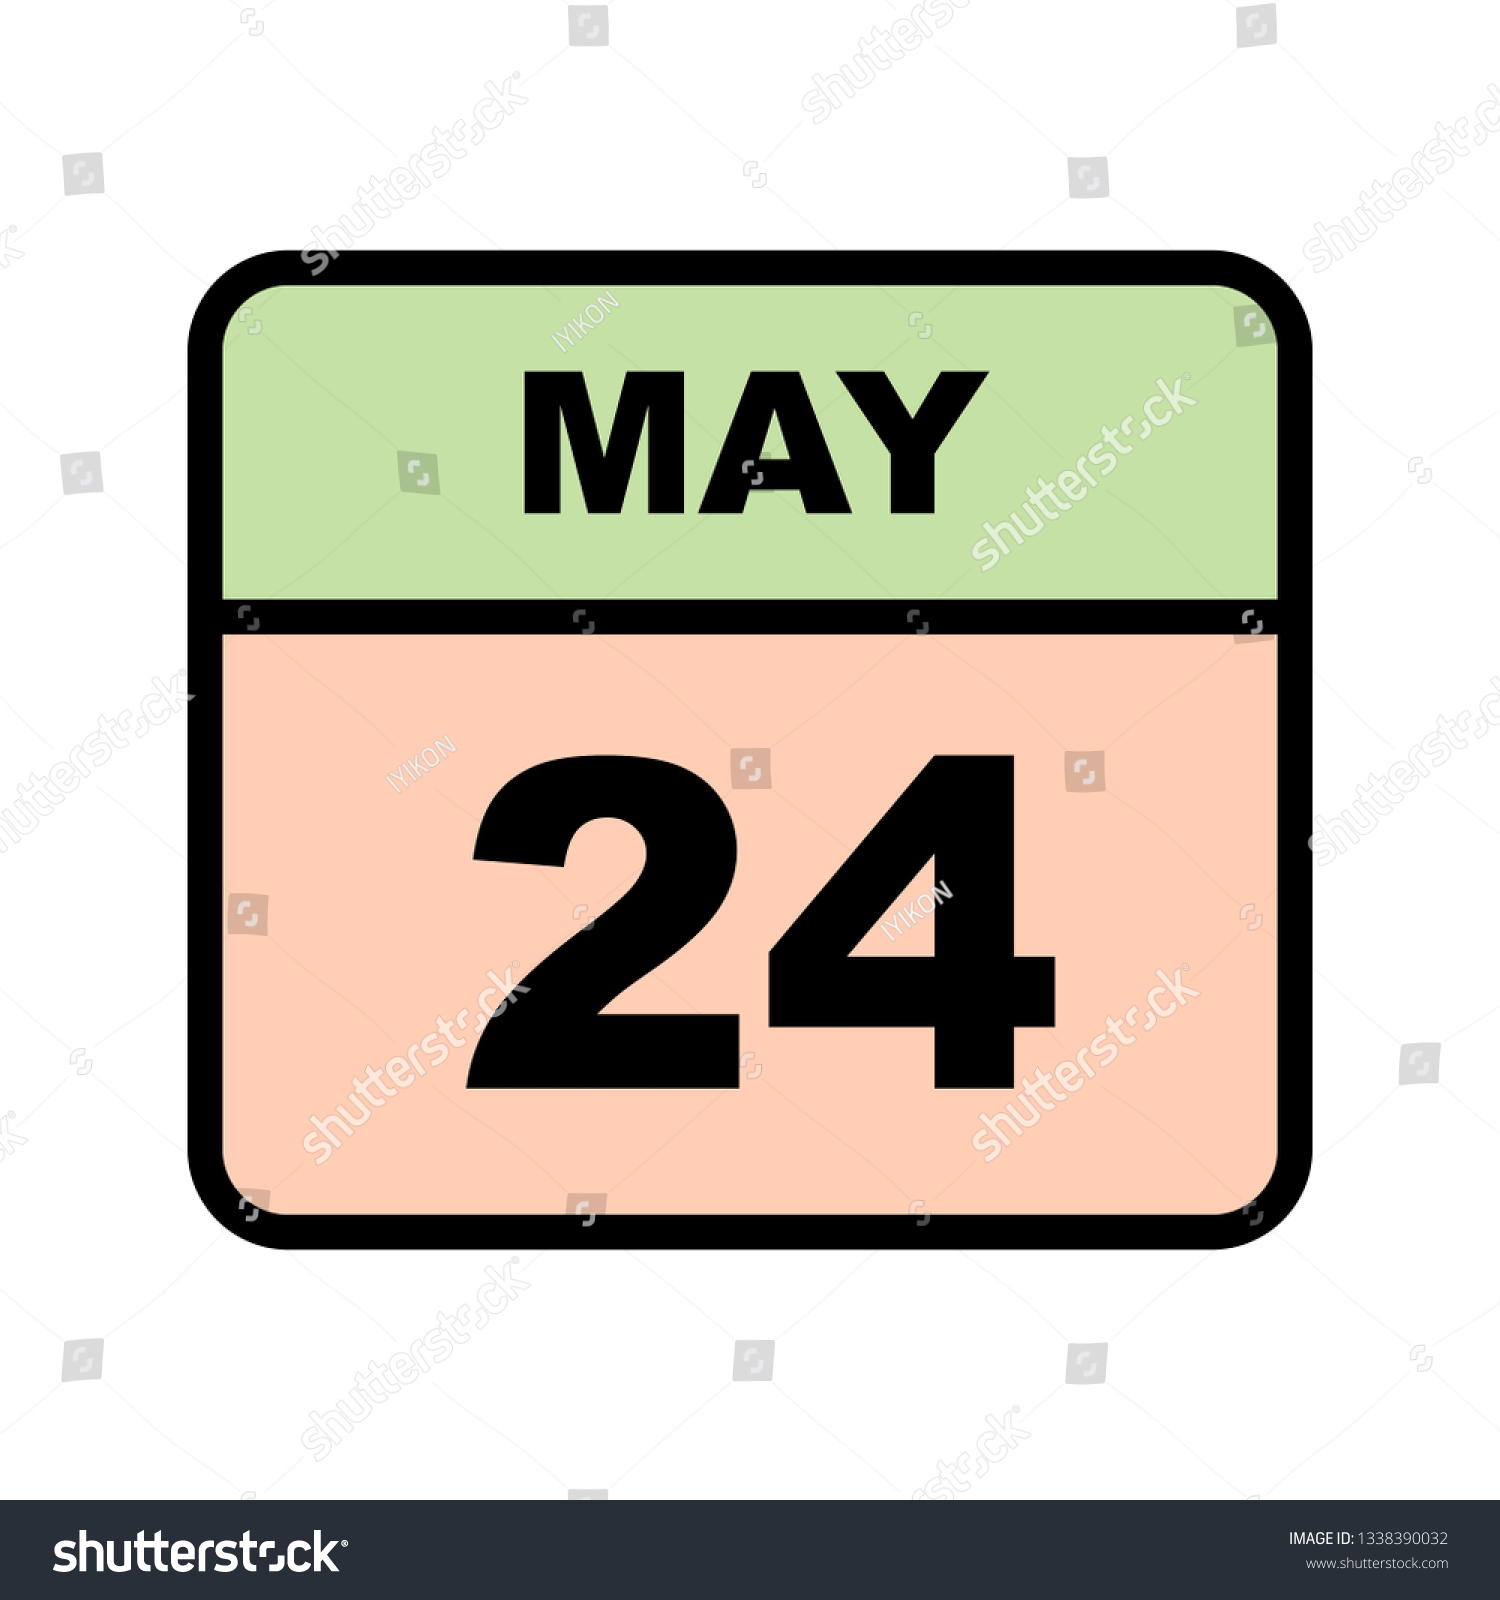 May 24th Date on a Single Day Calendar Royalty Free Stock Vector